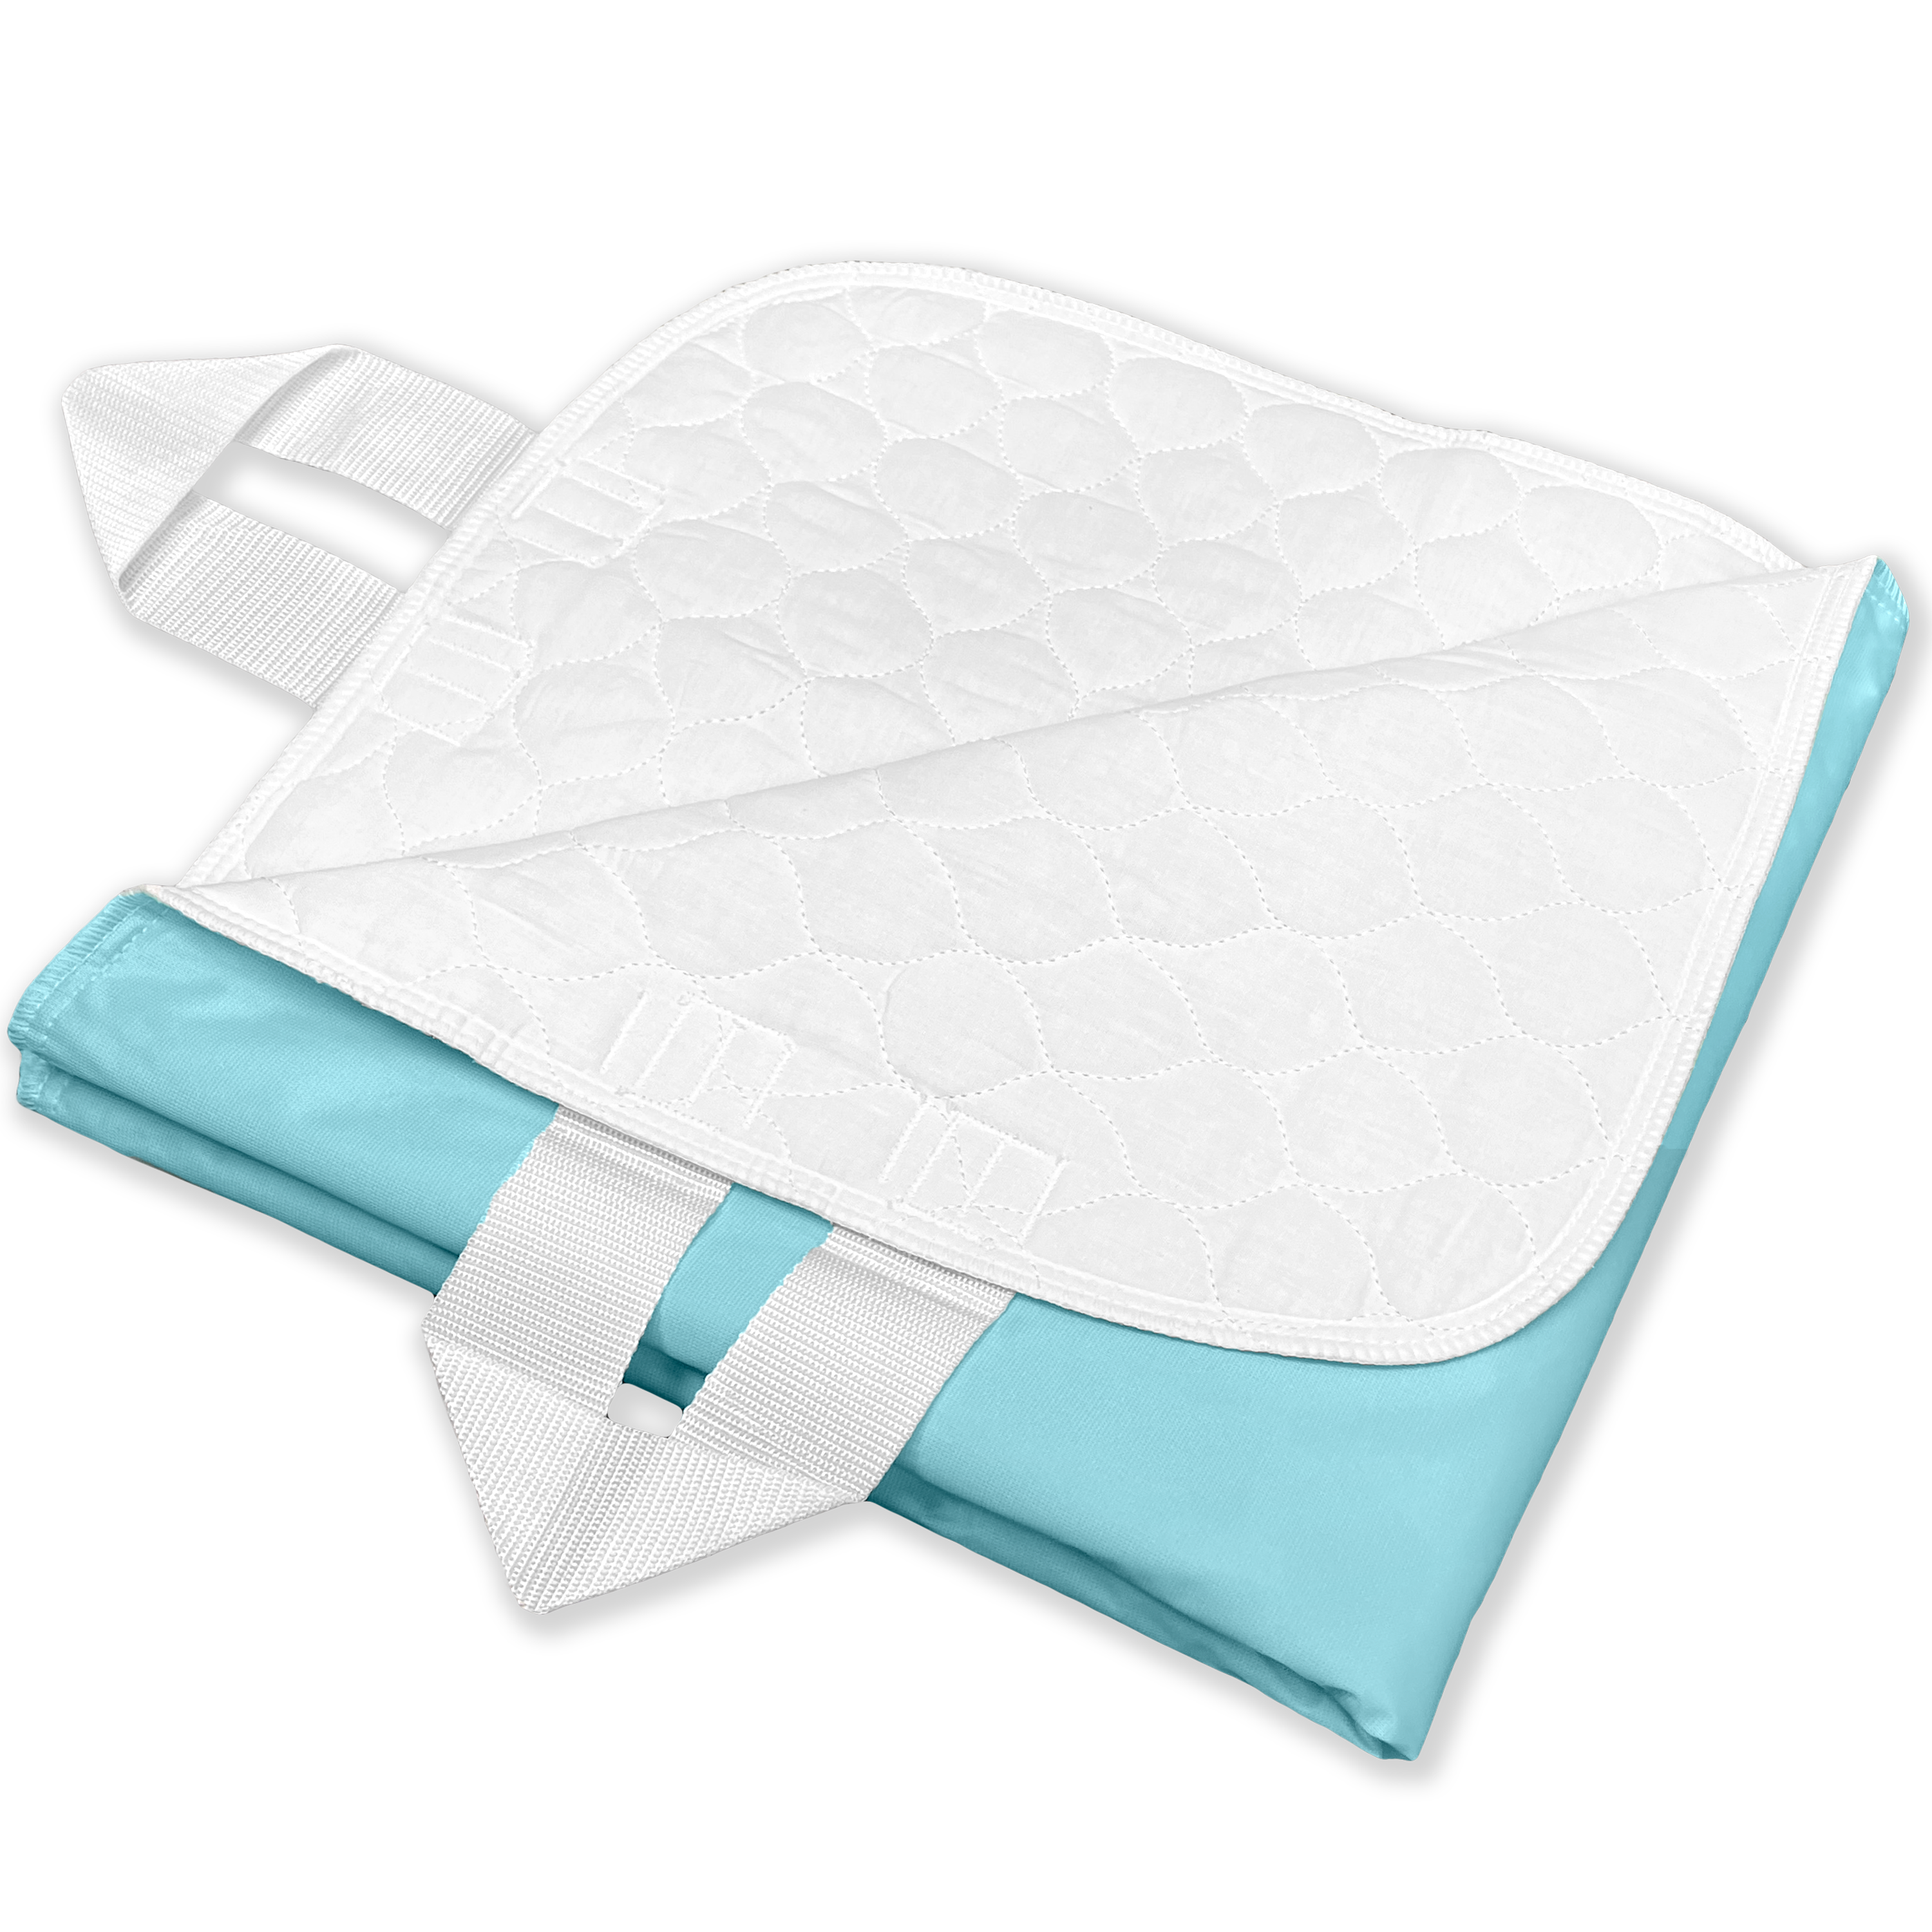 Hospital Underpads / Bed Pads